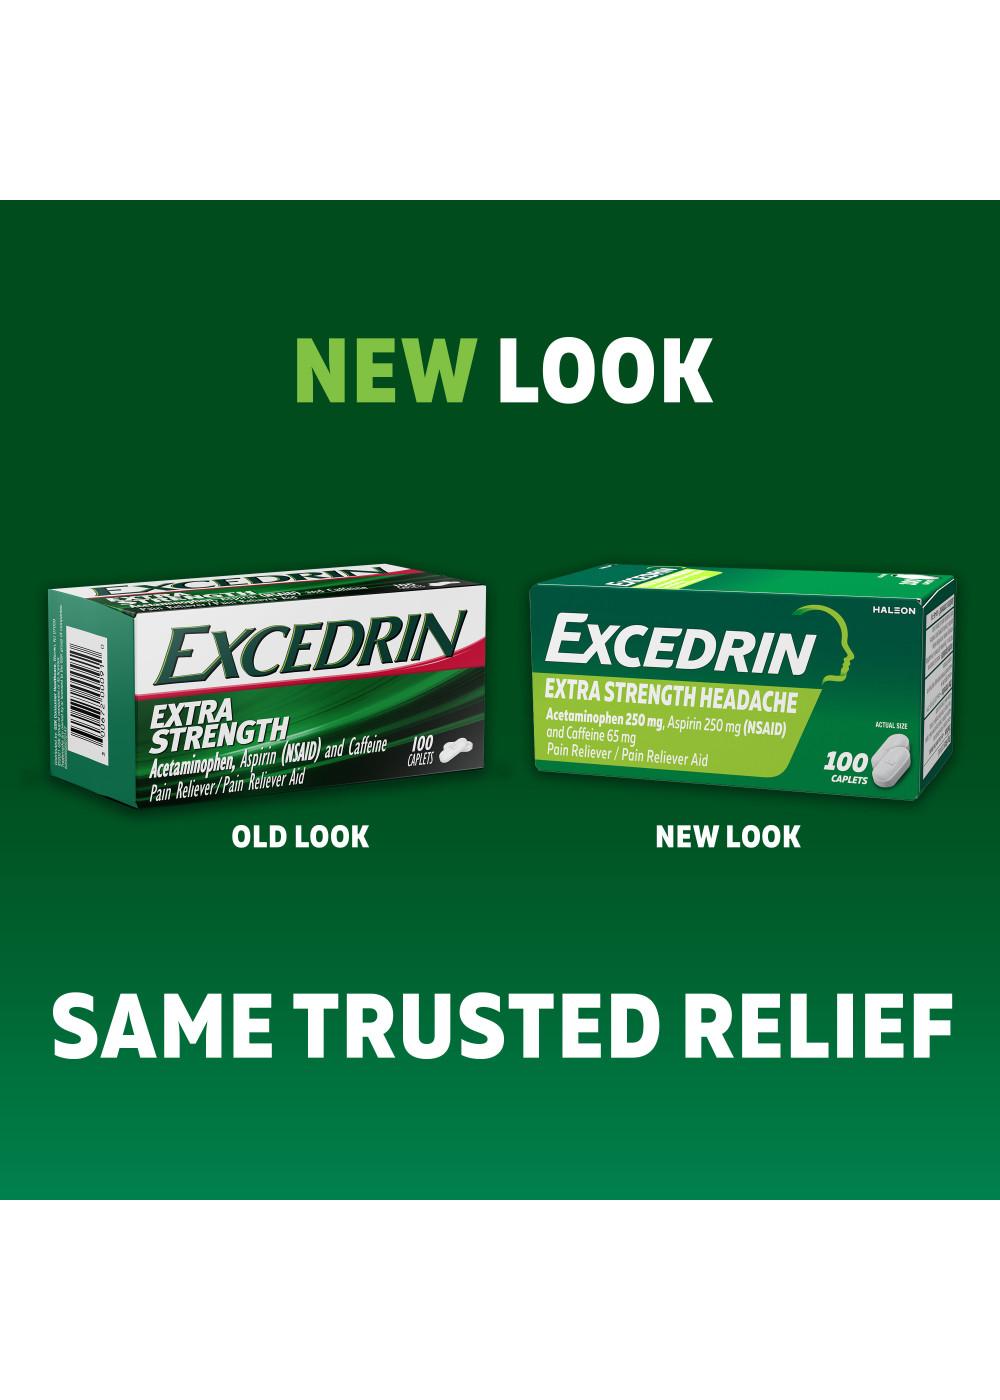 Excedrin Extra Strength Pain Reliever Caplets; image 9 of 9